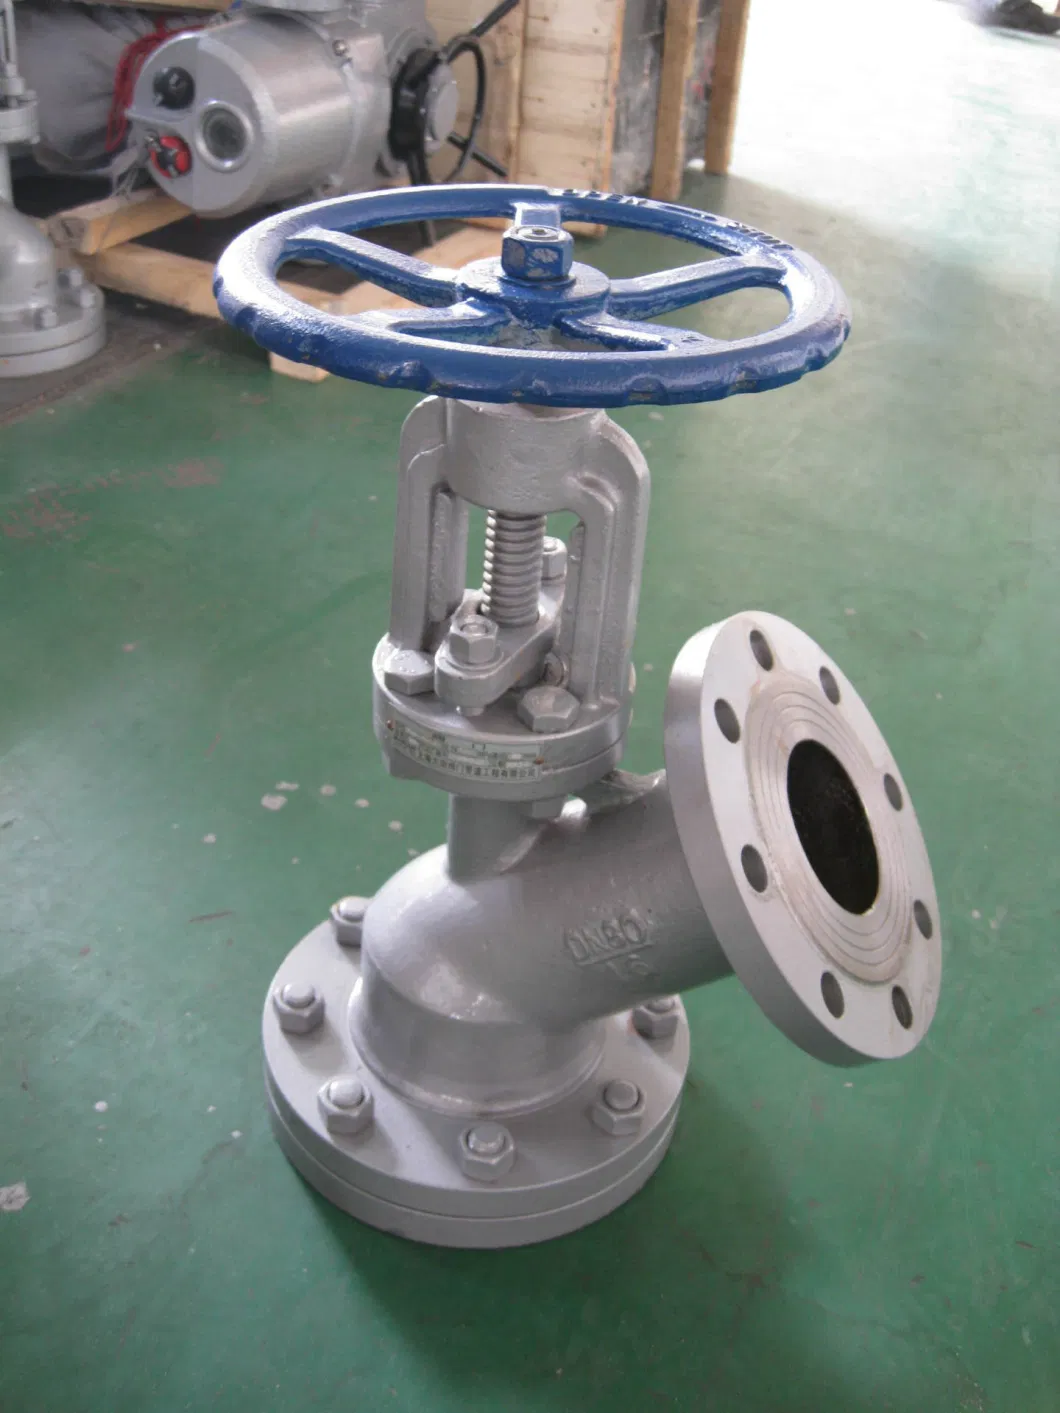 Stainless Steel Pneumatically Actuated Downward Expanding Discharge Valve Available